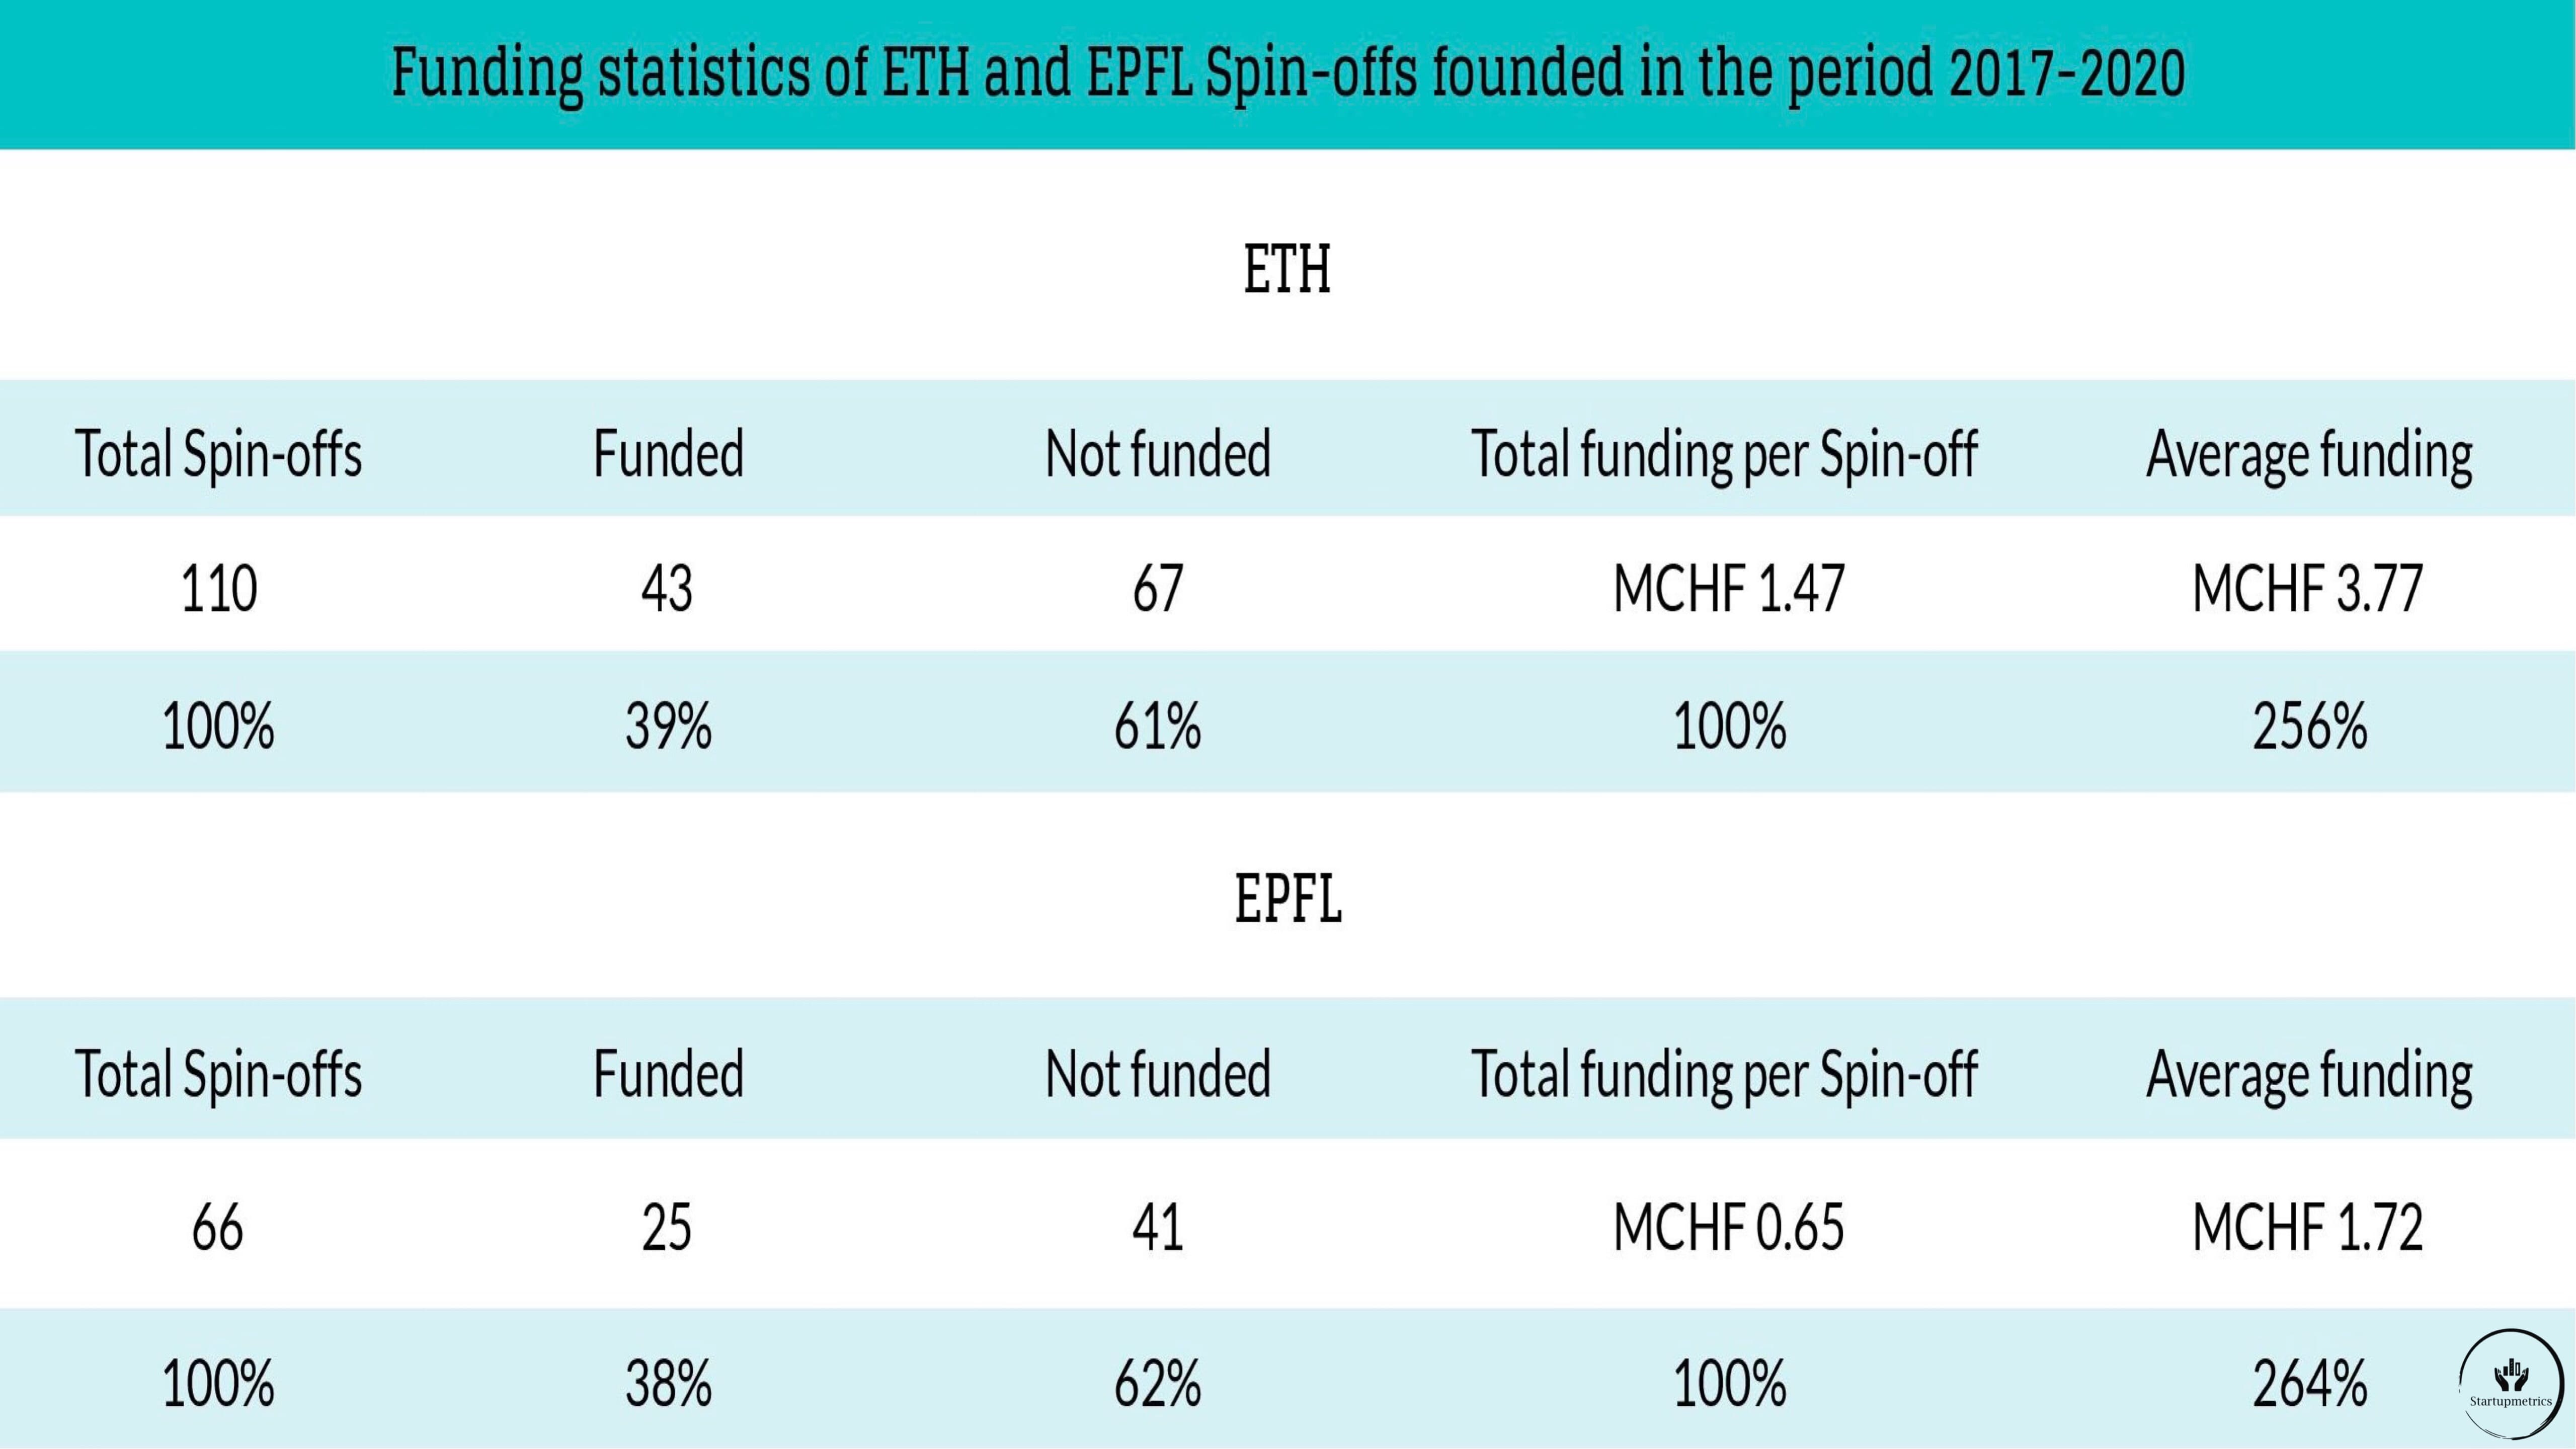 ETH Spin-offs receive on Average more than twice as much Funding as EPFL spin-offs